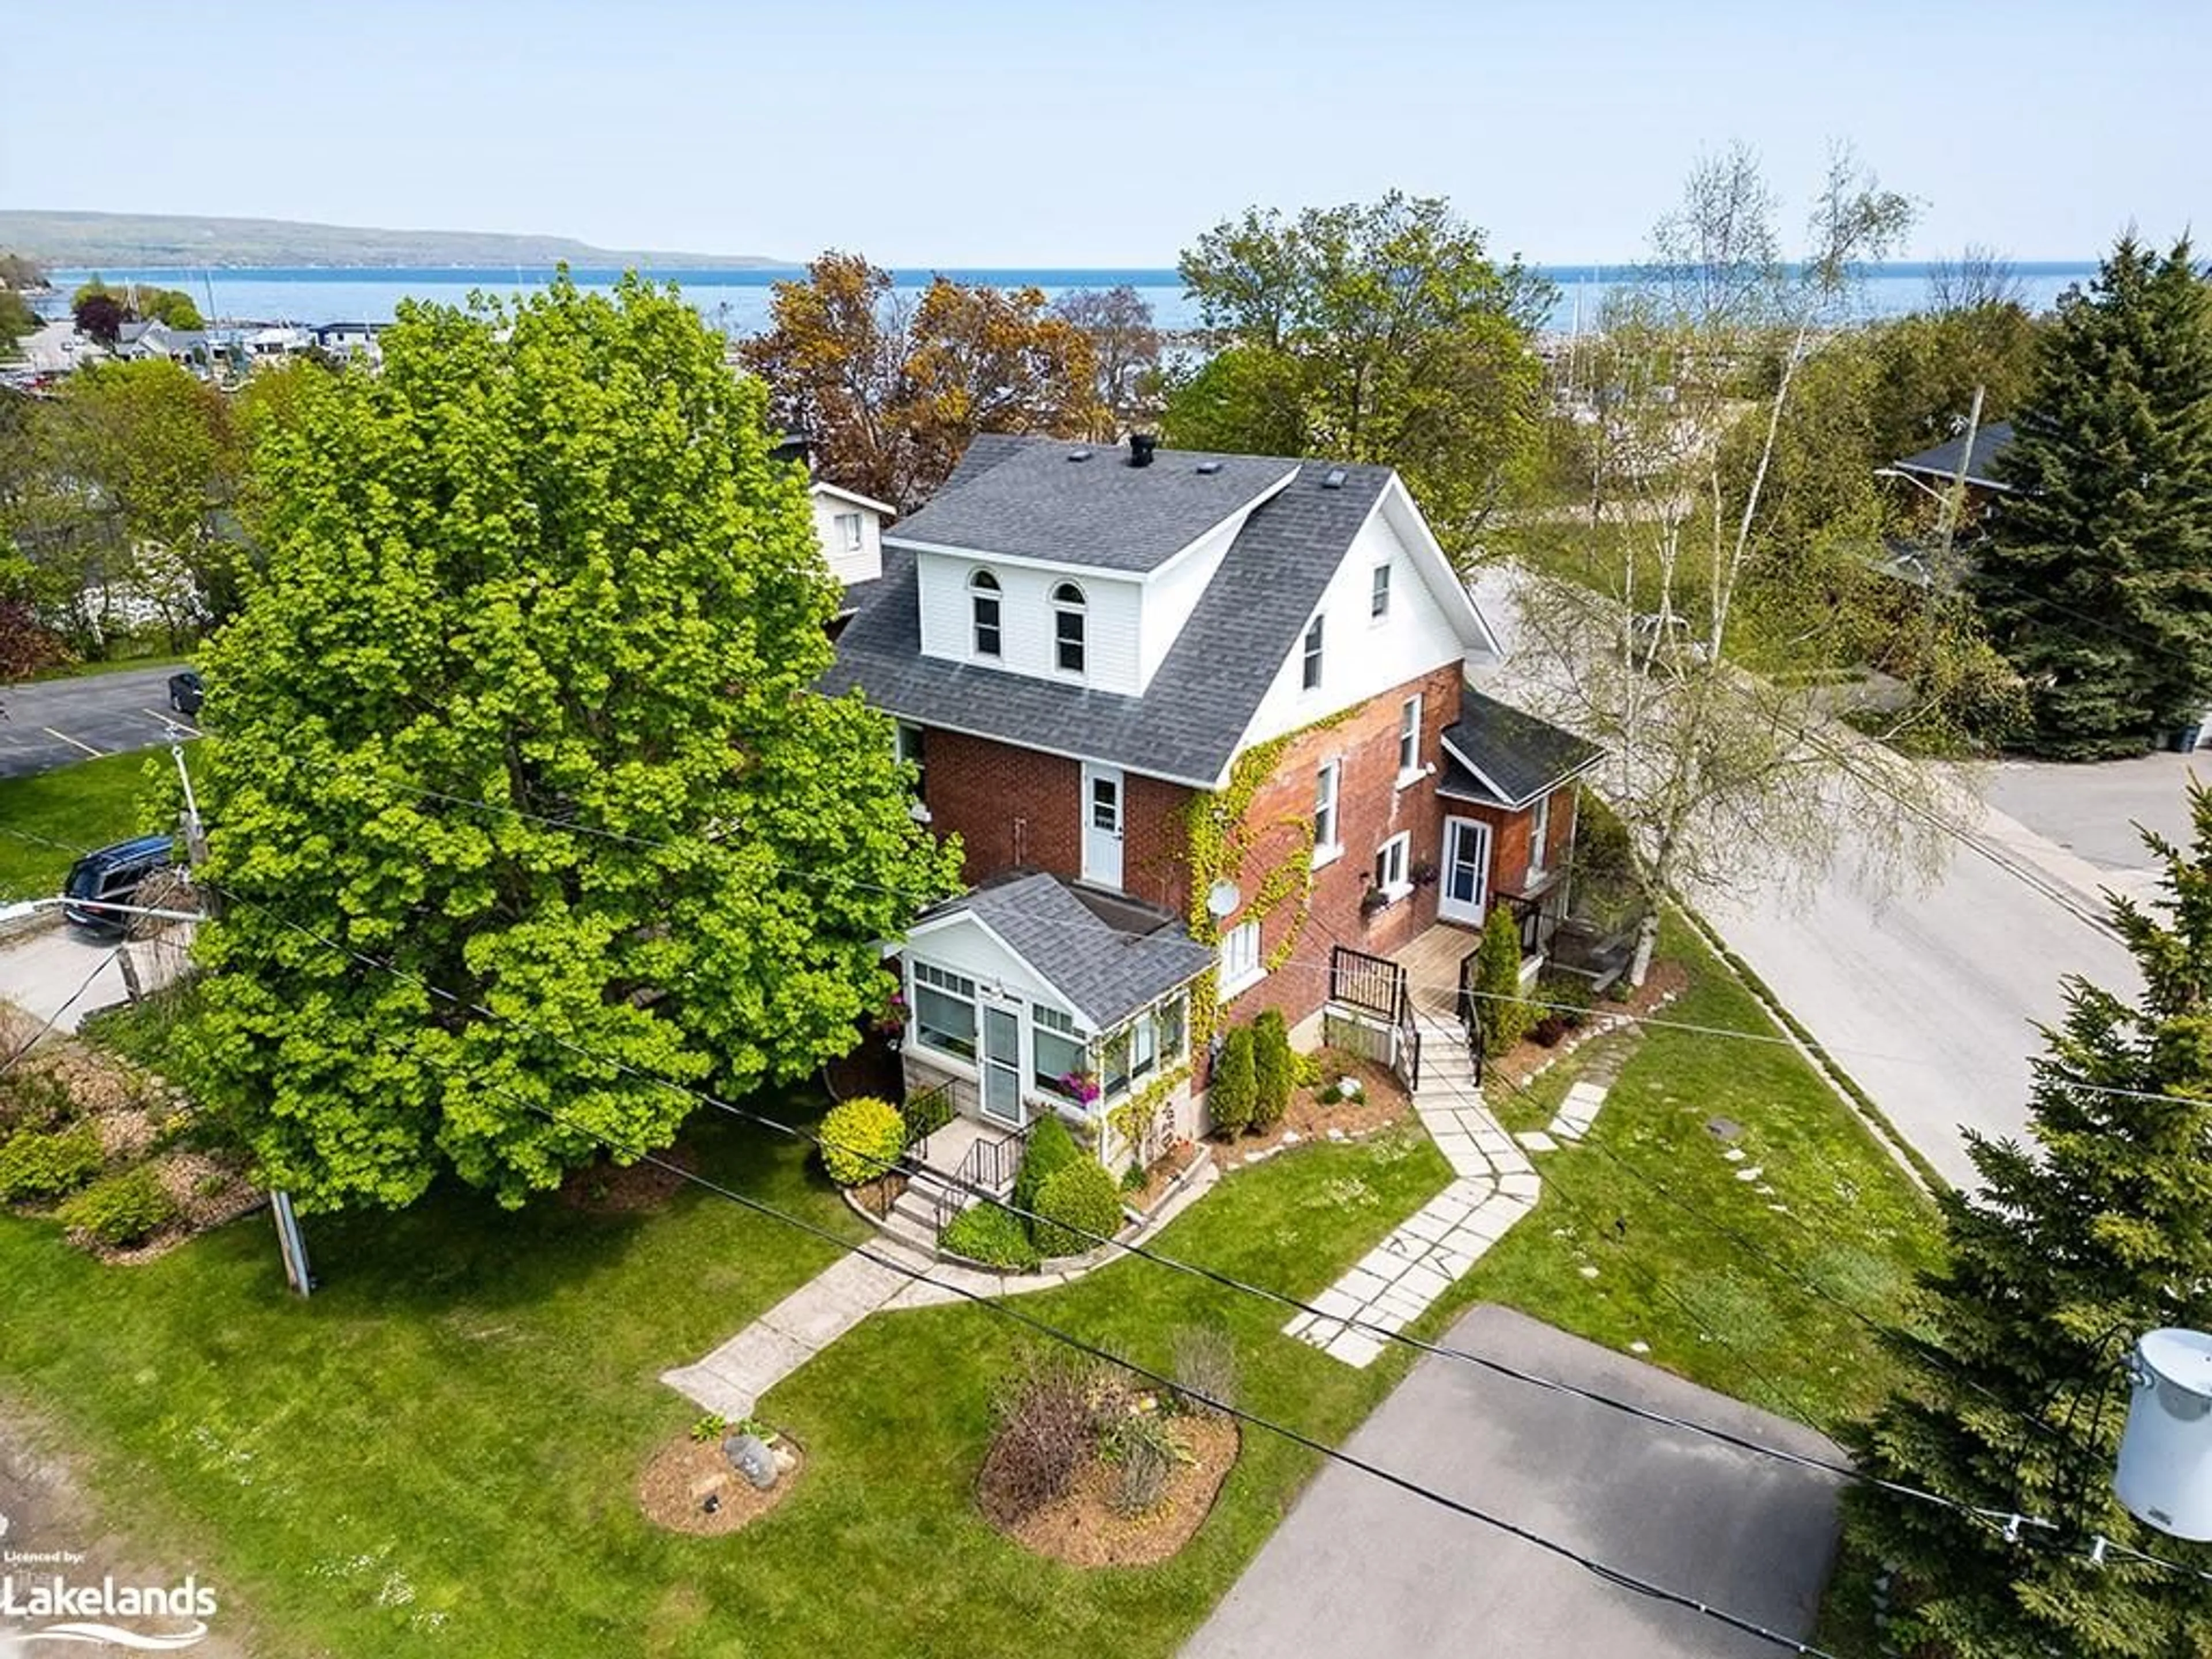 Lakeview for 56 Bridge St, Meaford Ontario N4L 1B9